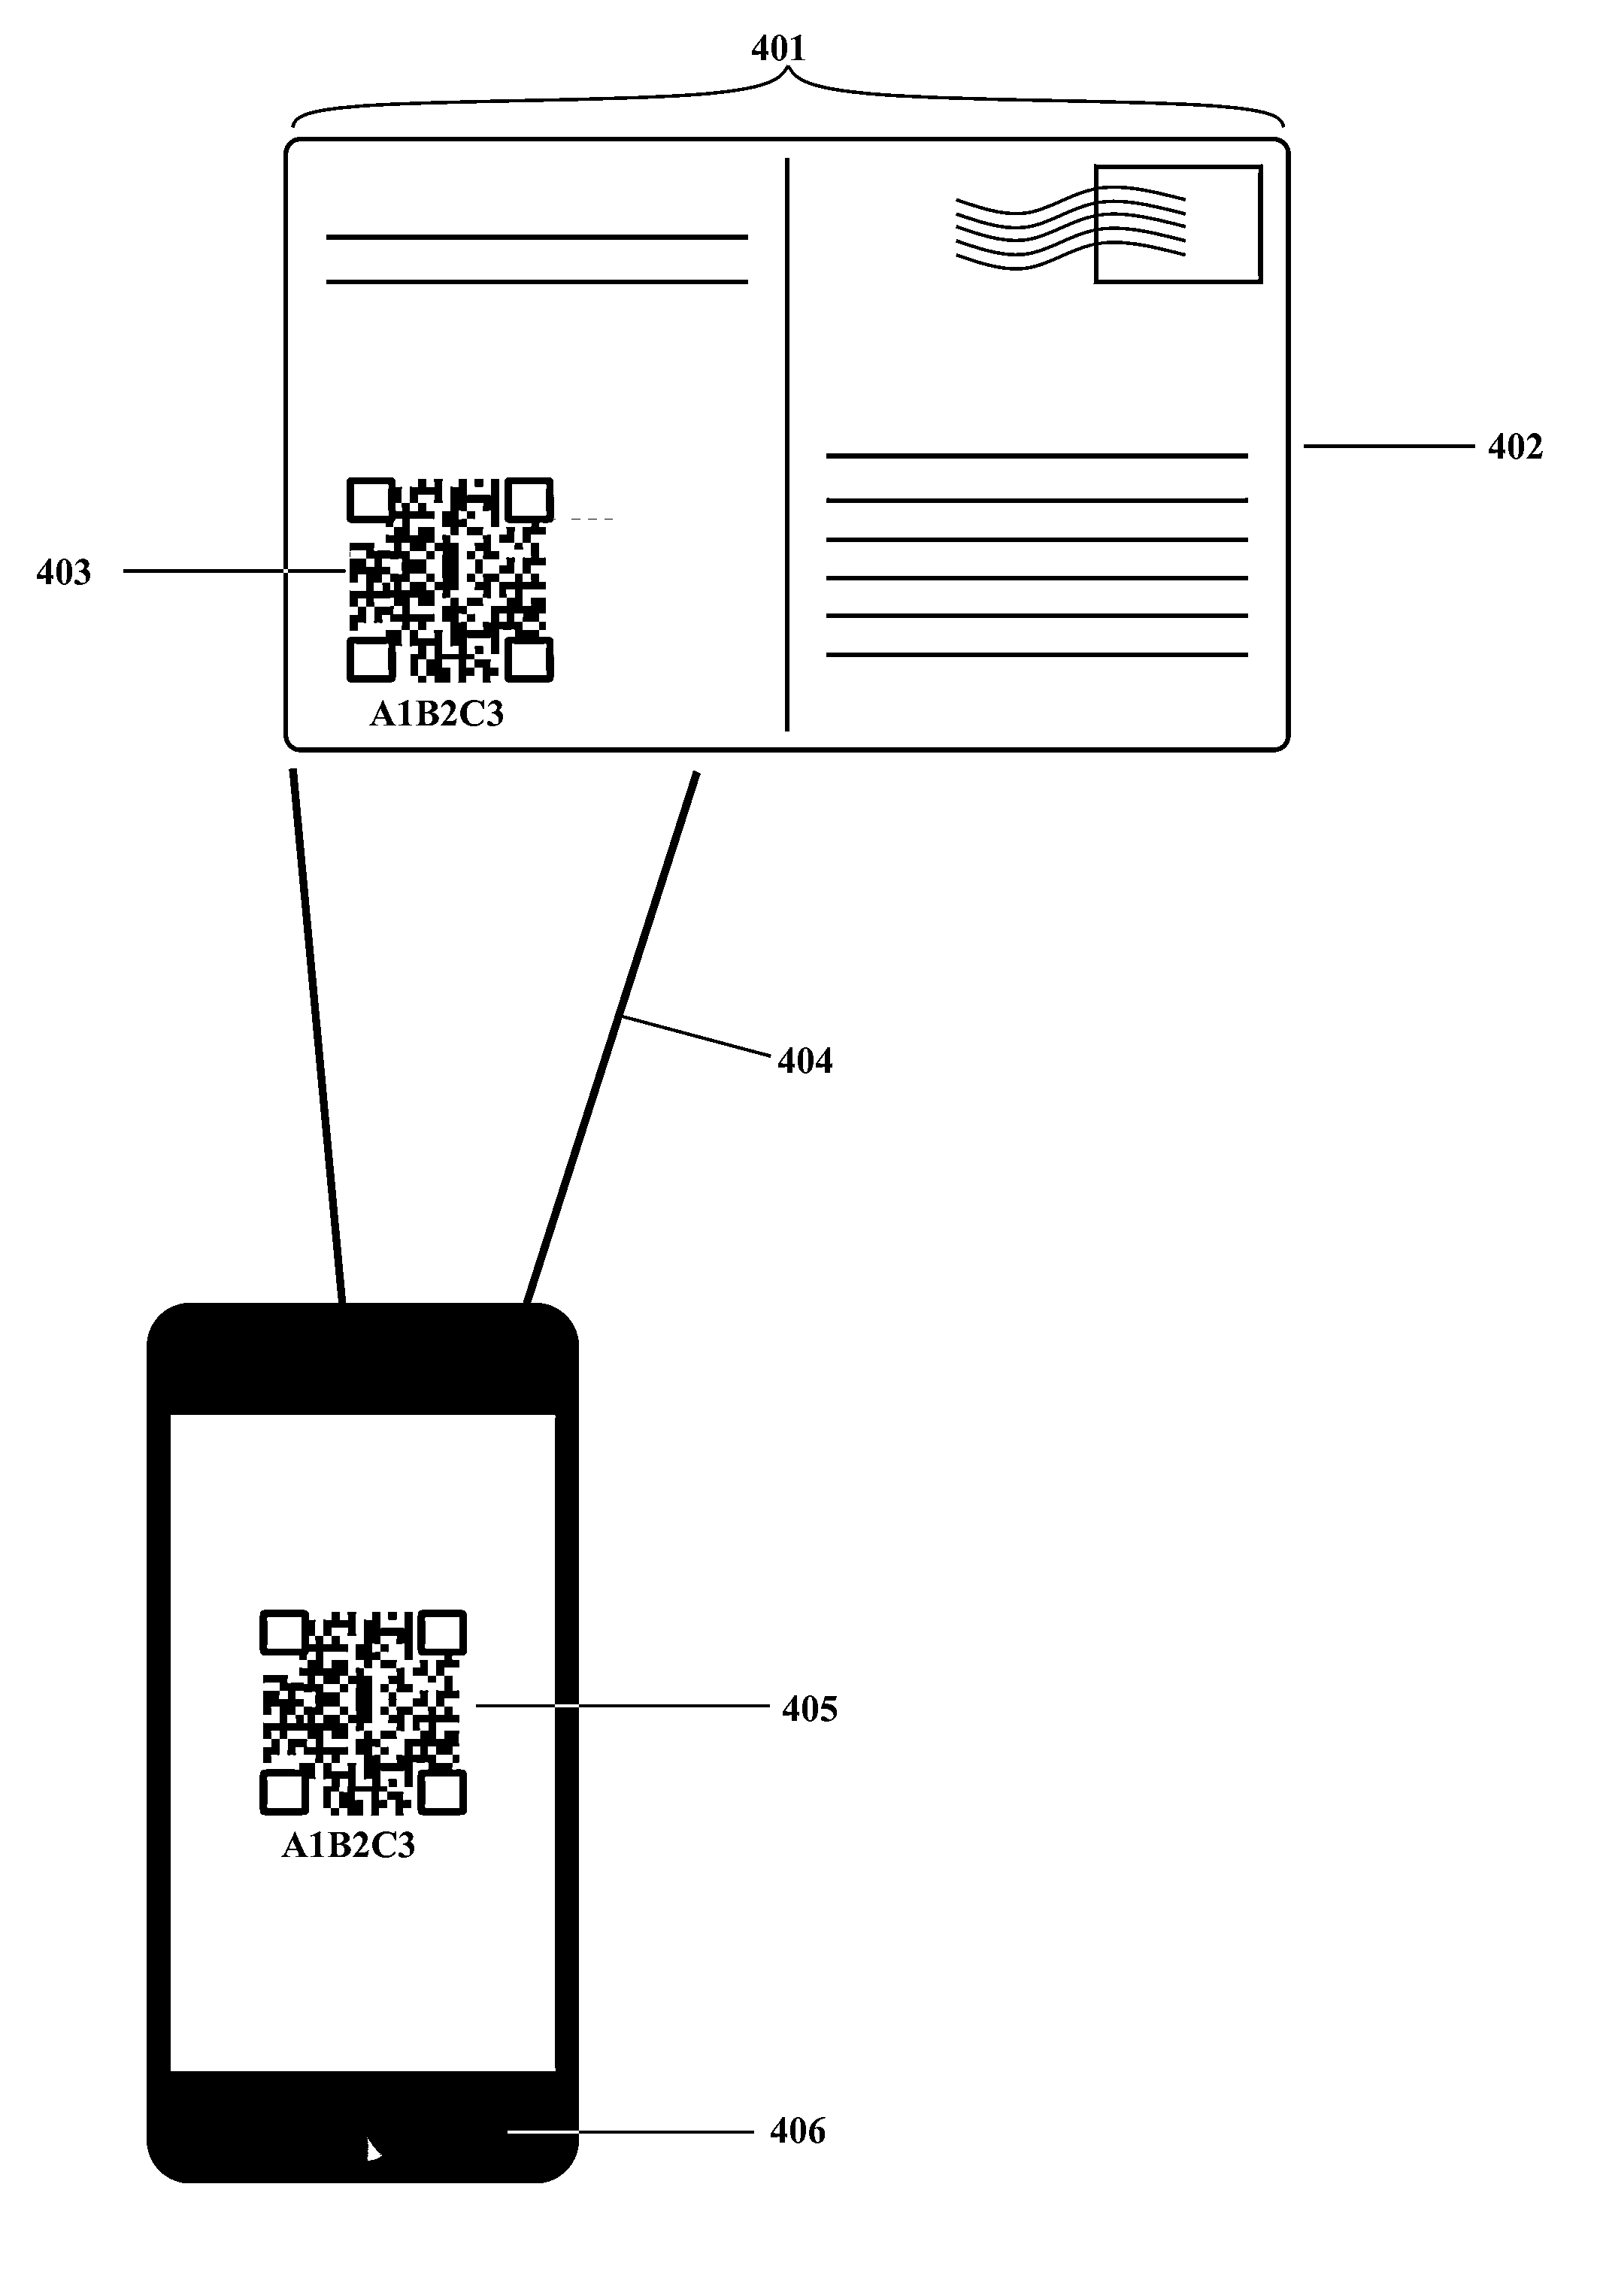 Display card with memory tag- hybrid multidimensional bar text code